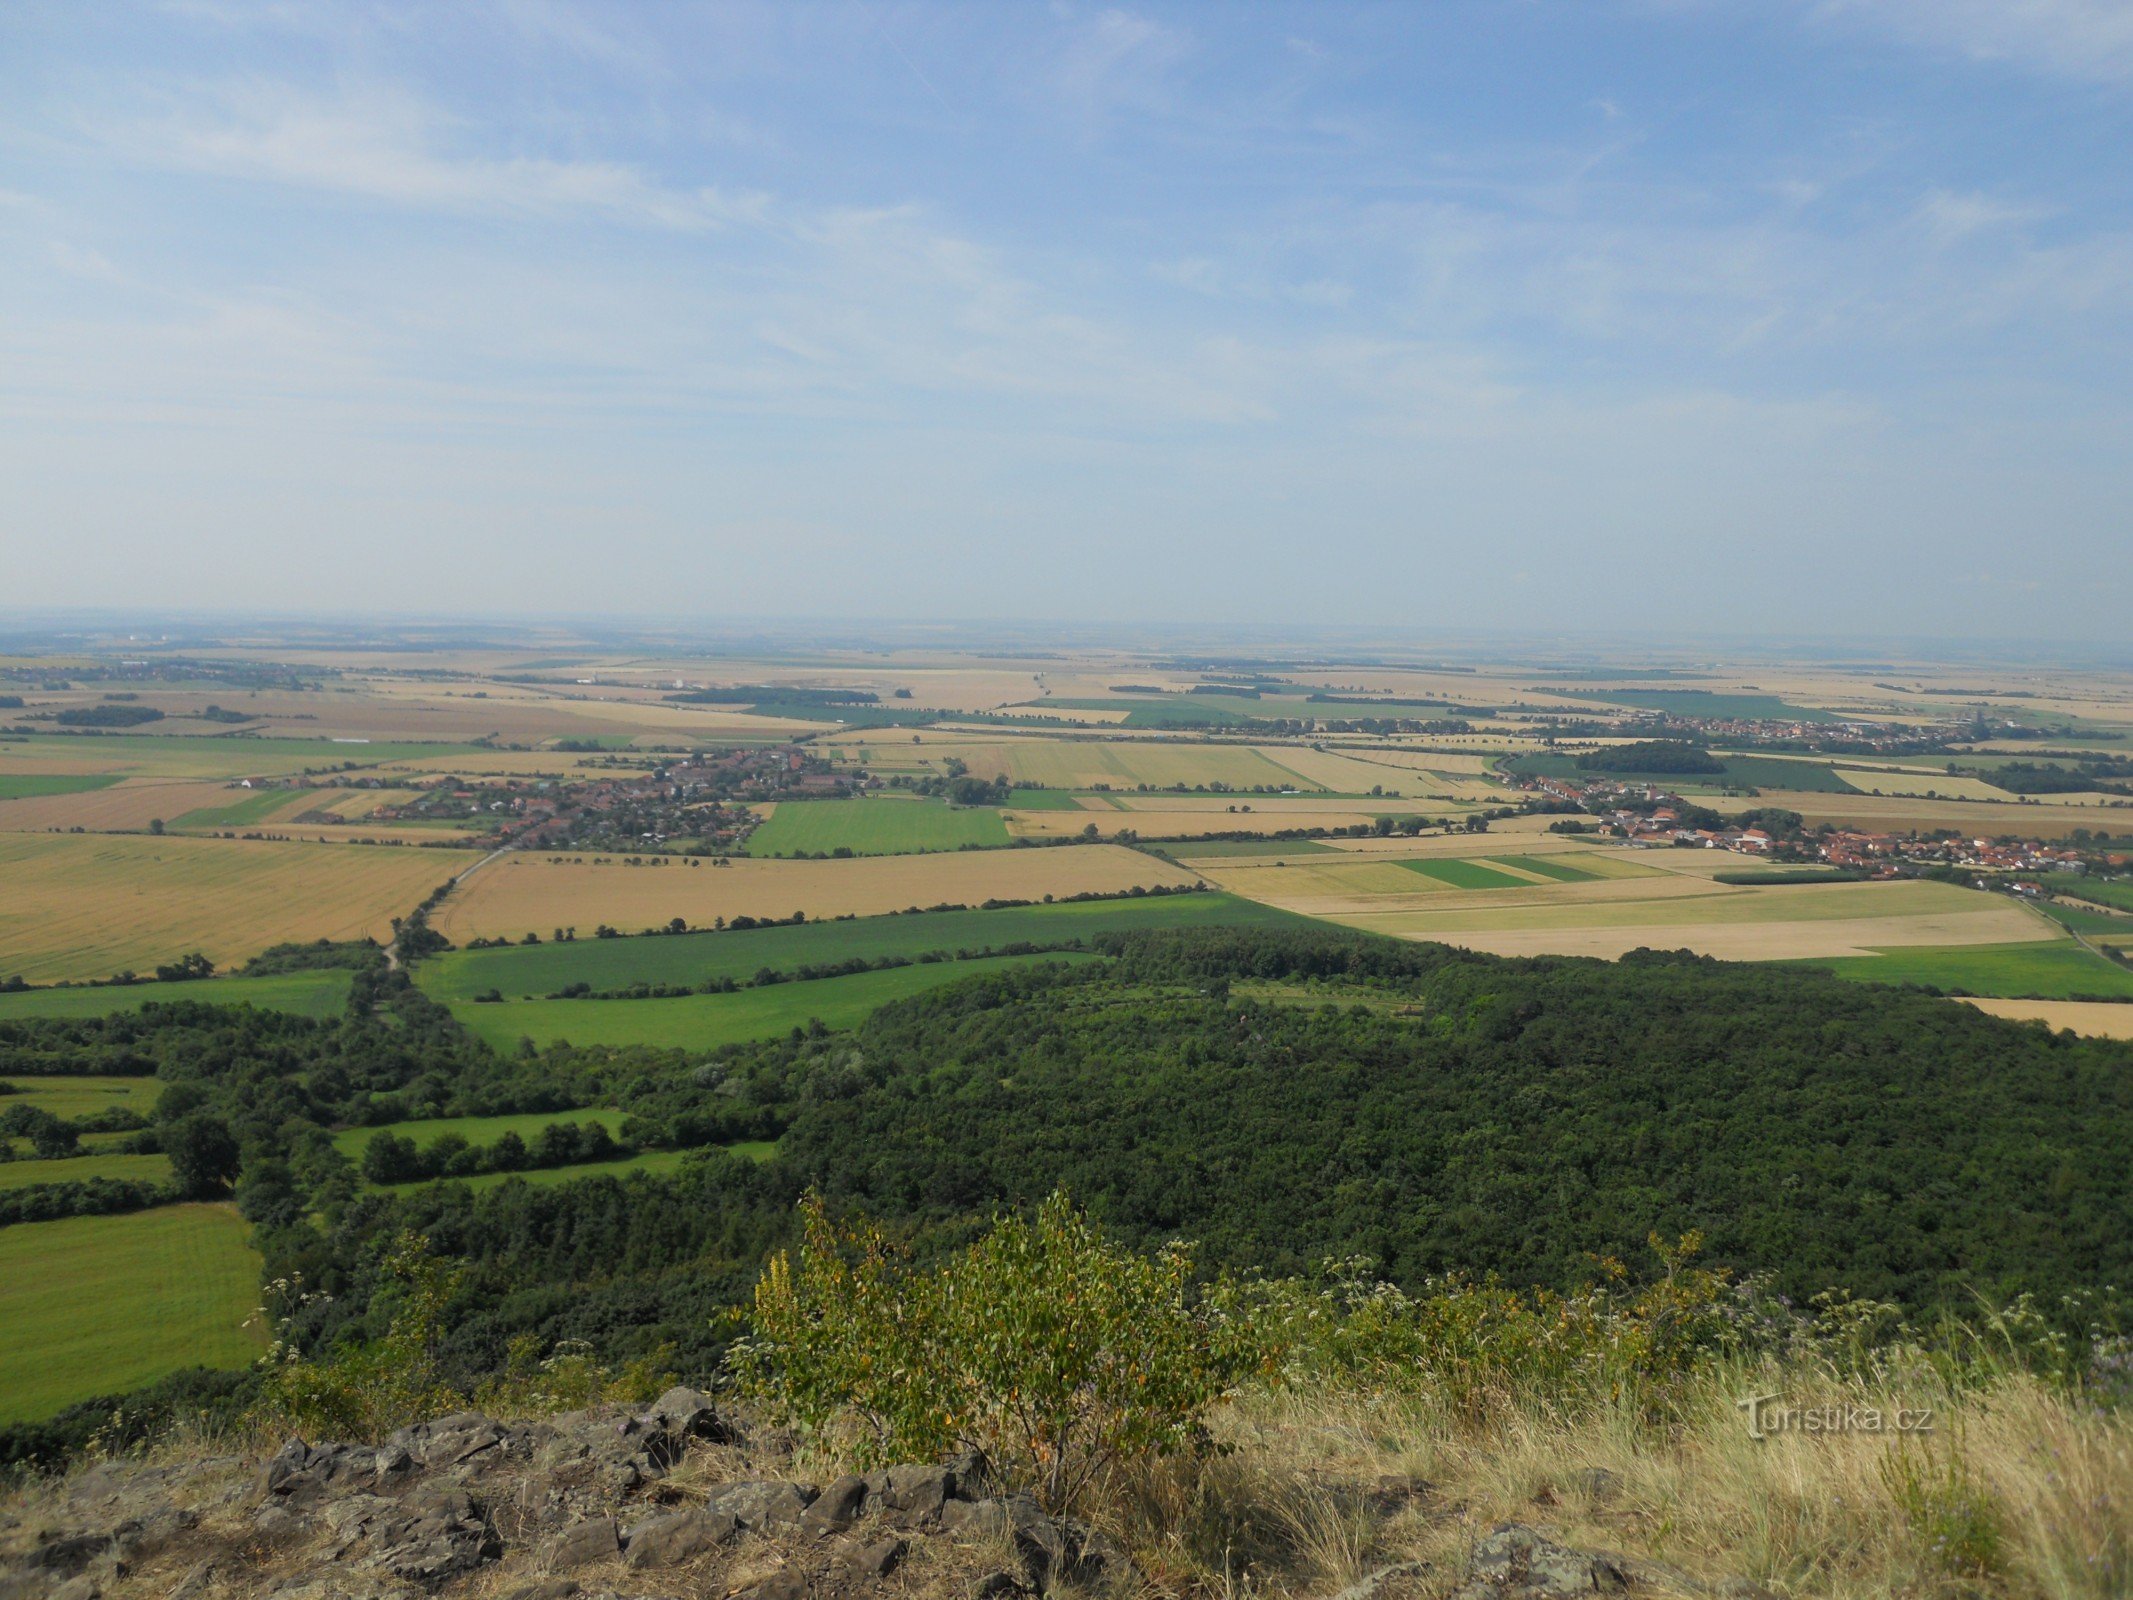 The view from Říp